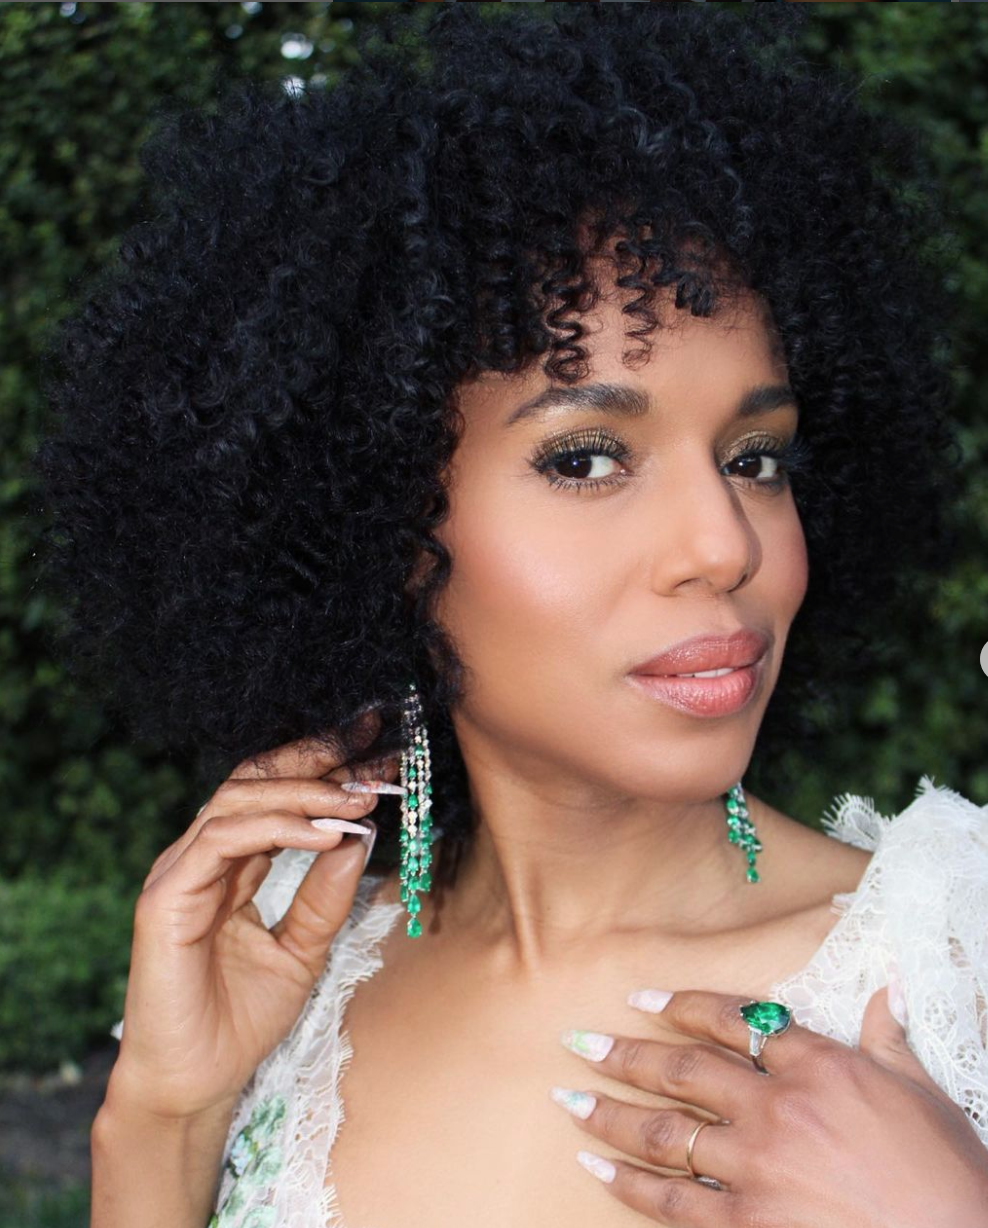 A close up of Kerry Washington with long earrings and fingernails.